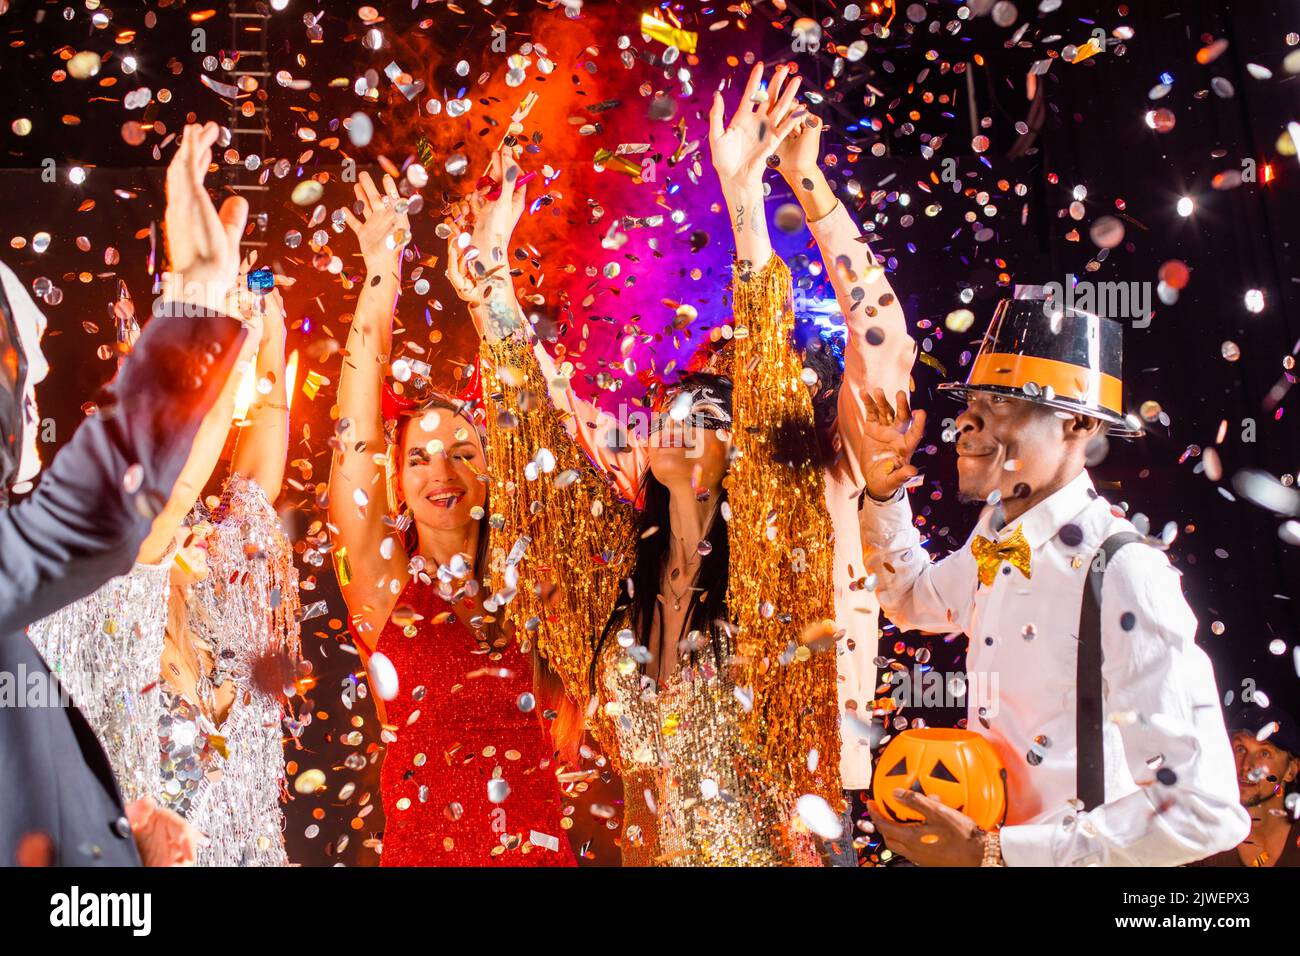 People dance at Halloween party with champagne glasses. Friends in the costumes in nightclub Stock Photo